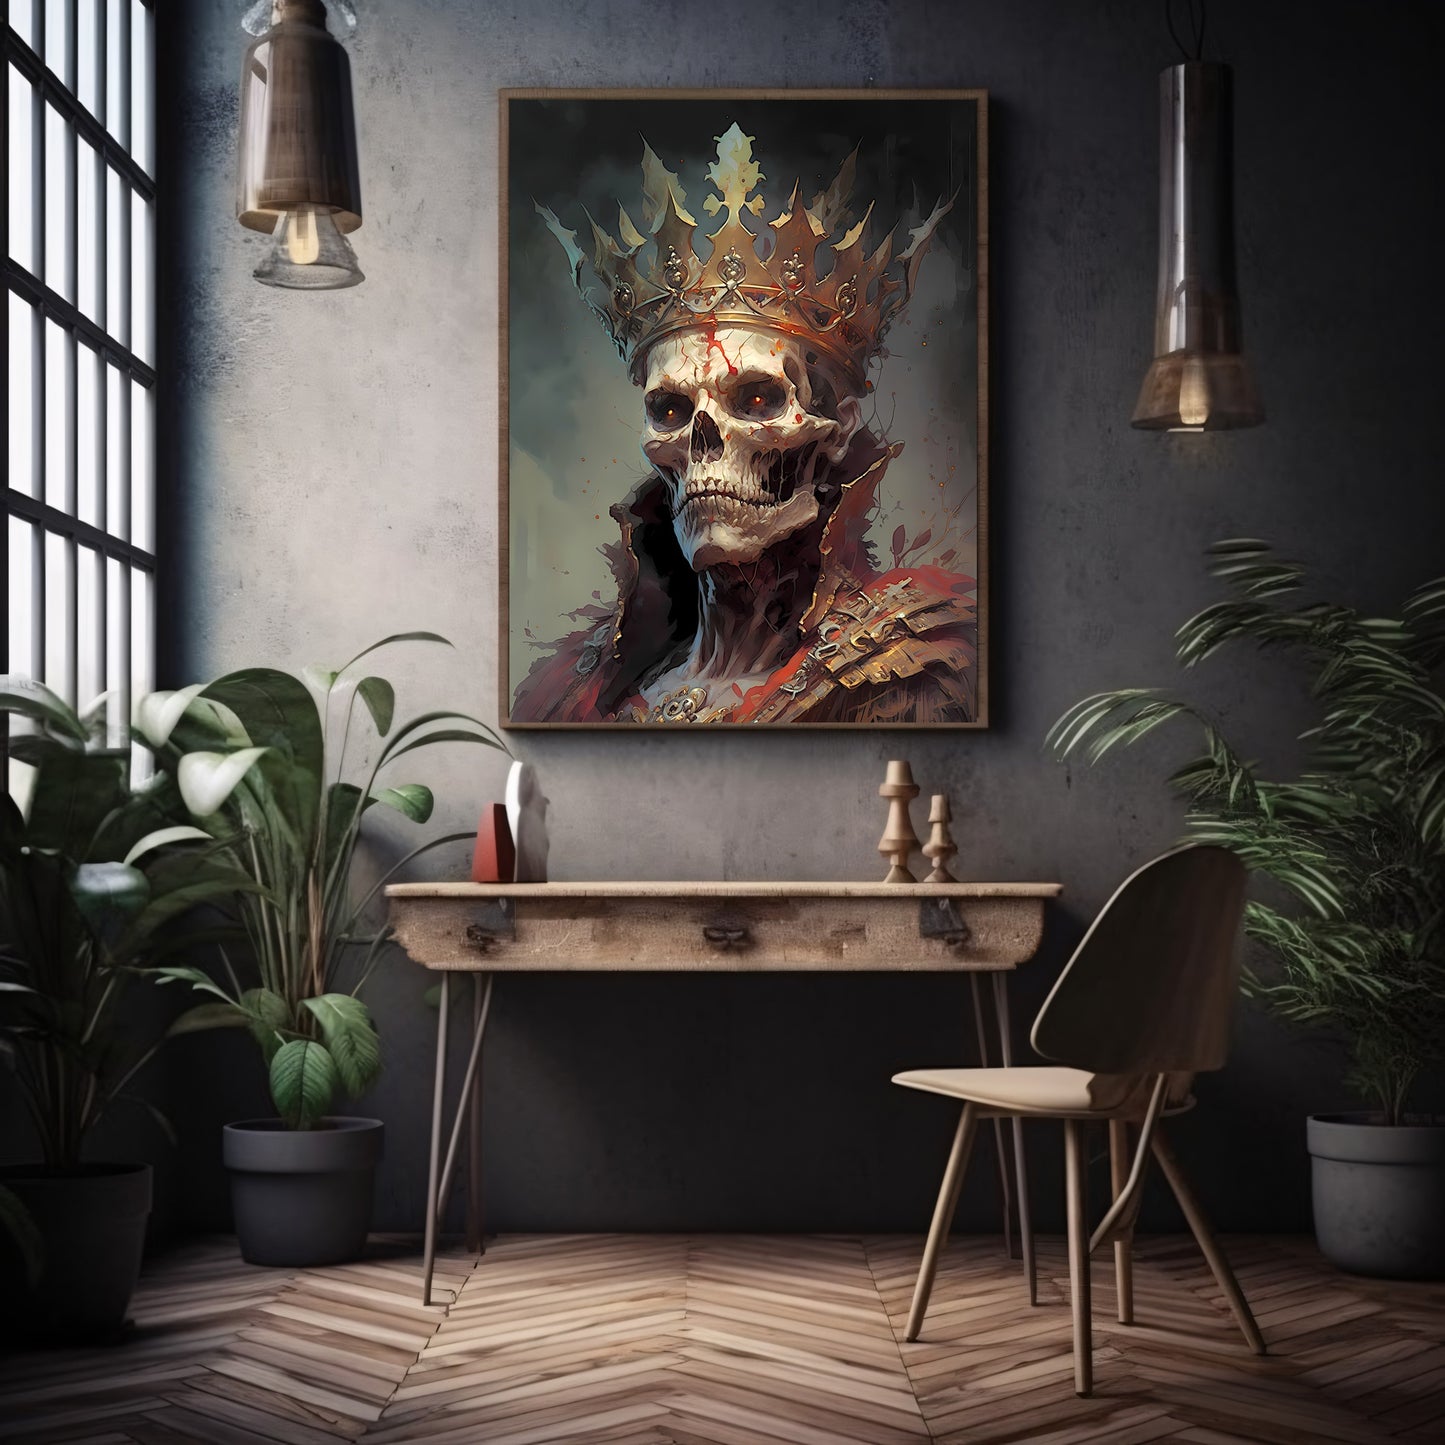 King of Death Gothic Wall Art Paper Poster Prints Wall Art Skull Portrait Gothic Home Decor Dark Academia Print Macabre Fantasy Painting Whimsigoth